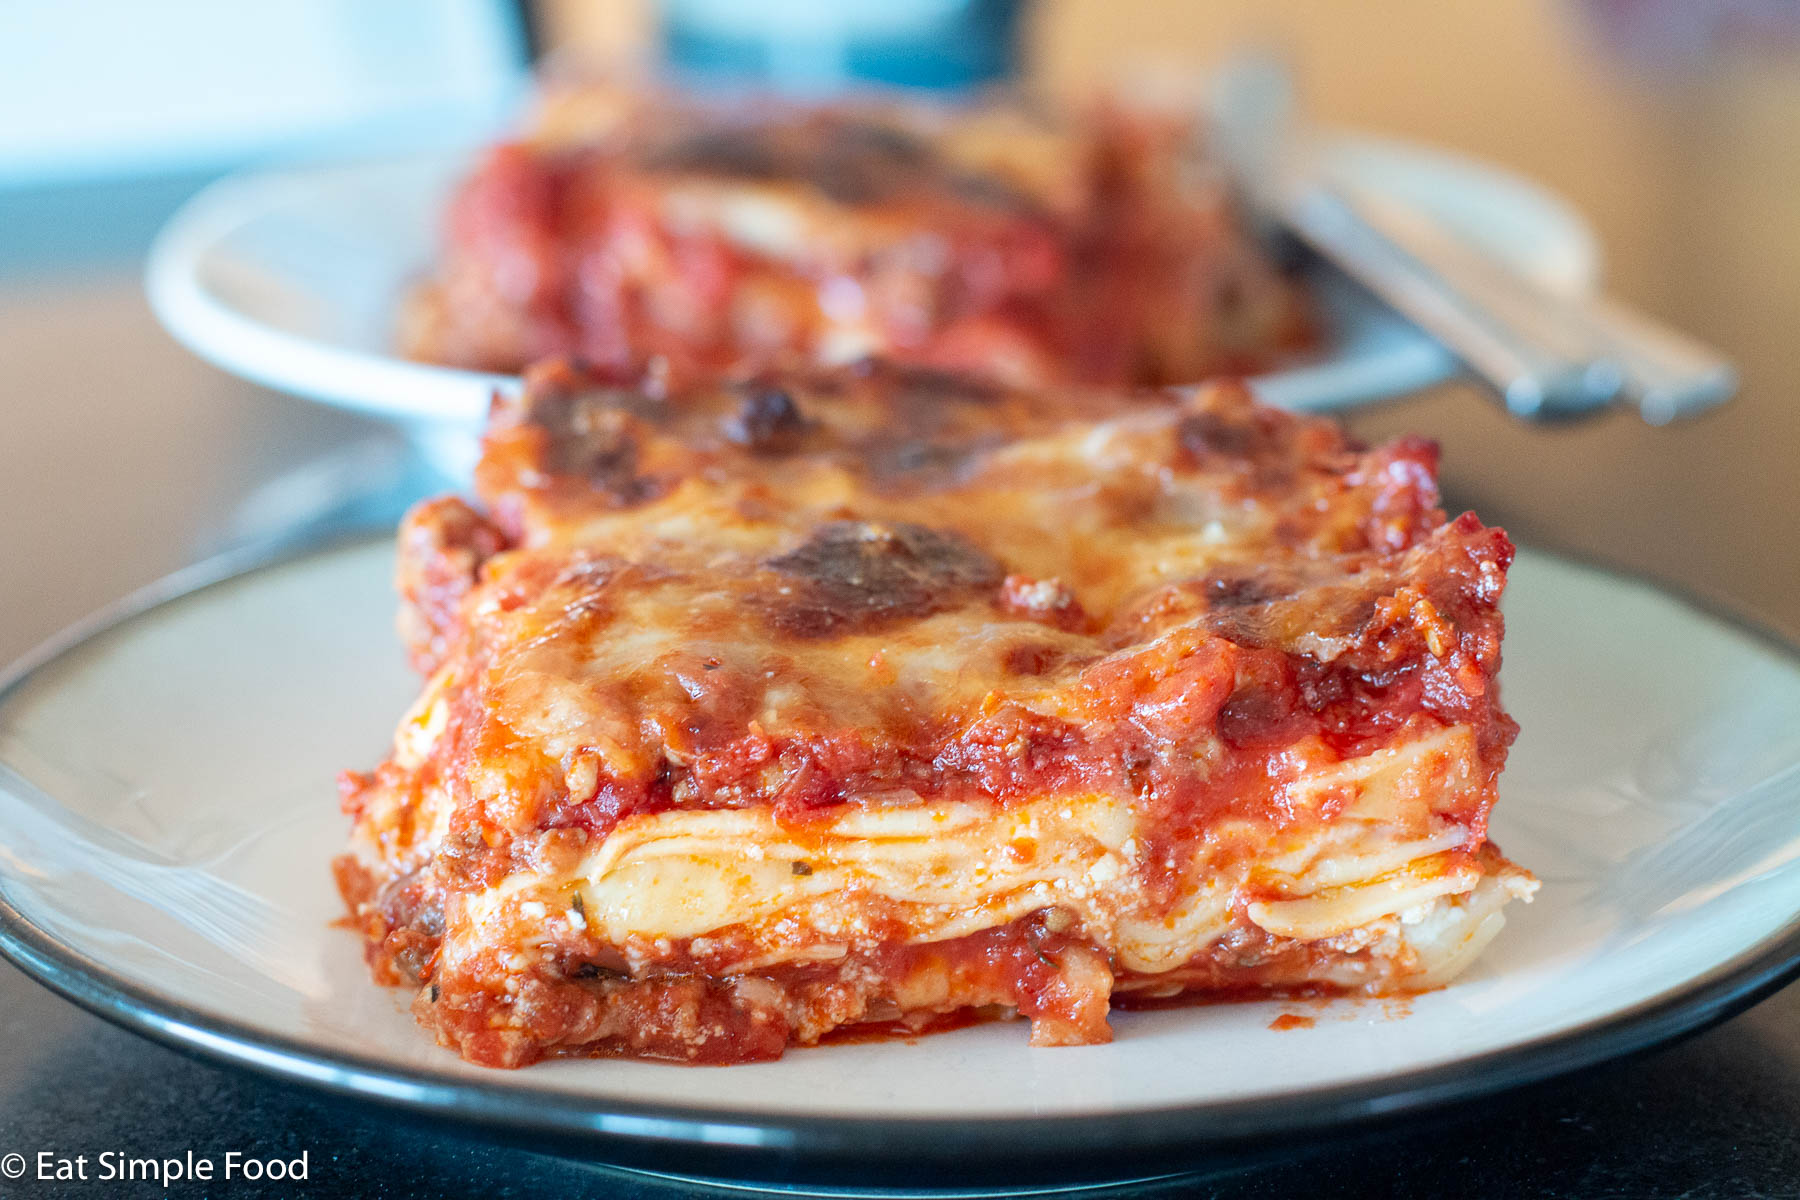 Slice of saucy meat lasagna on a white plate with another slice in the background. Close up